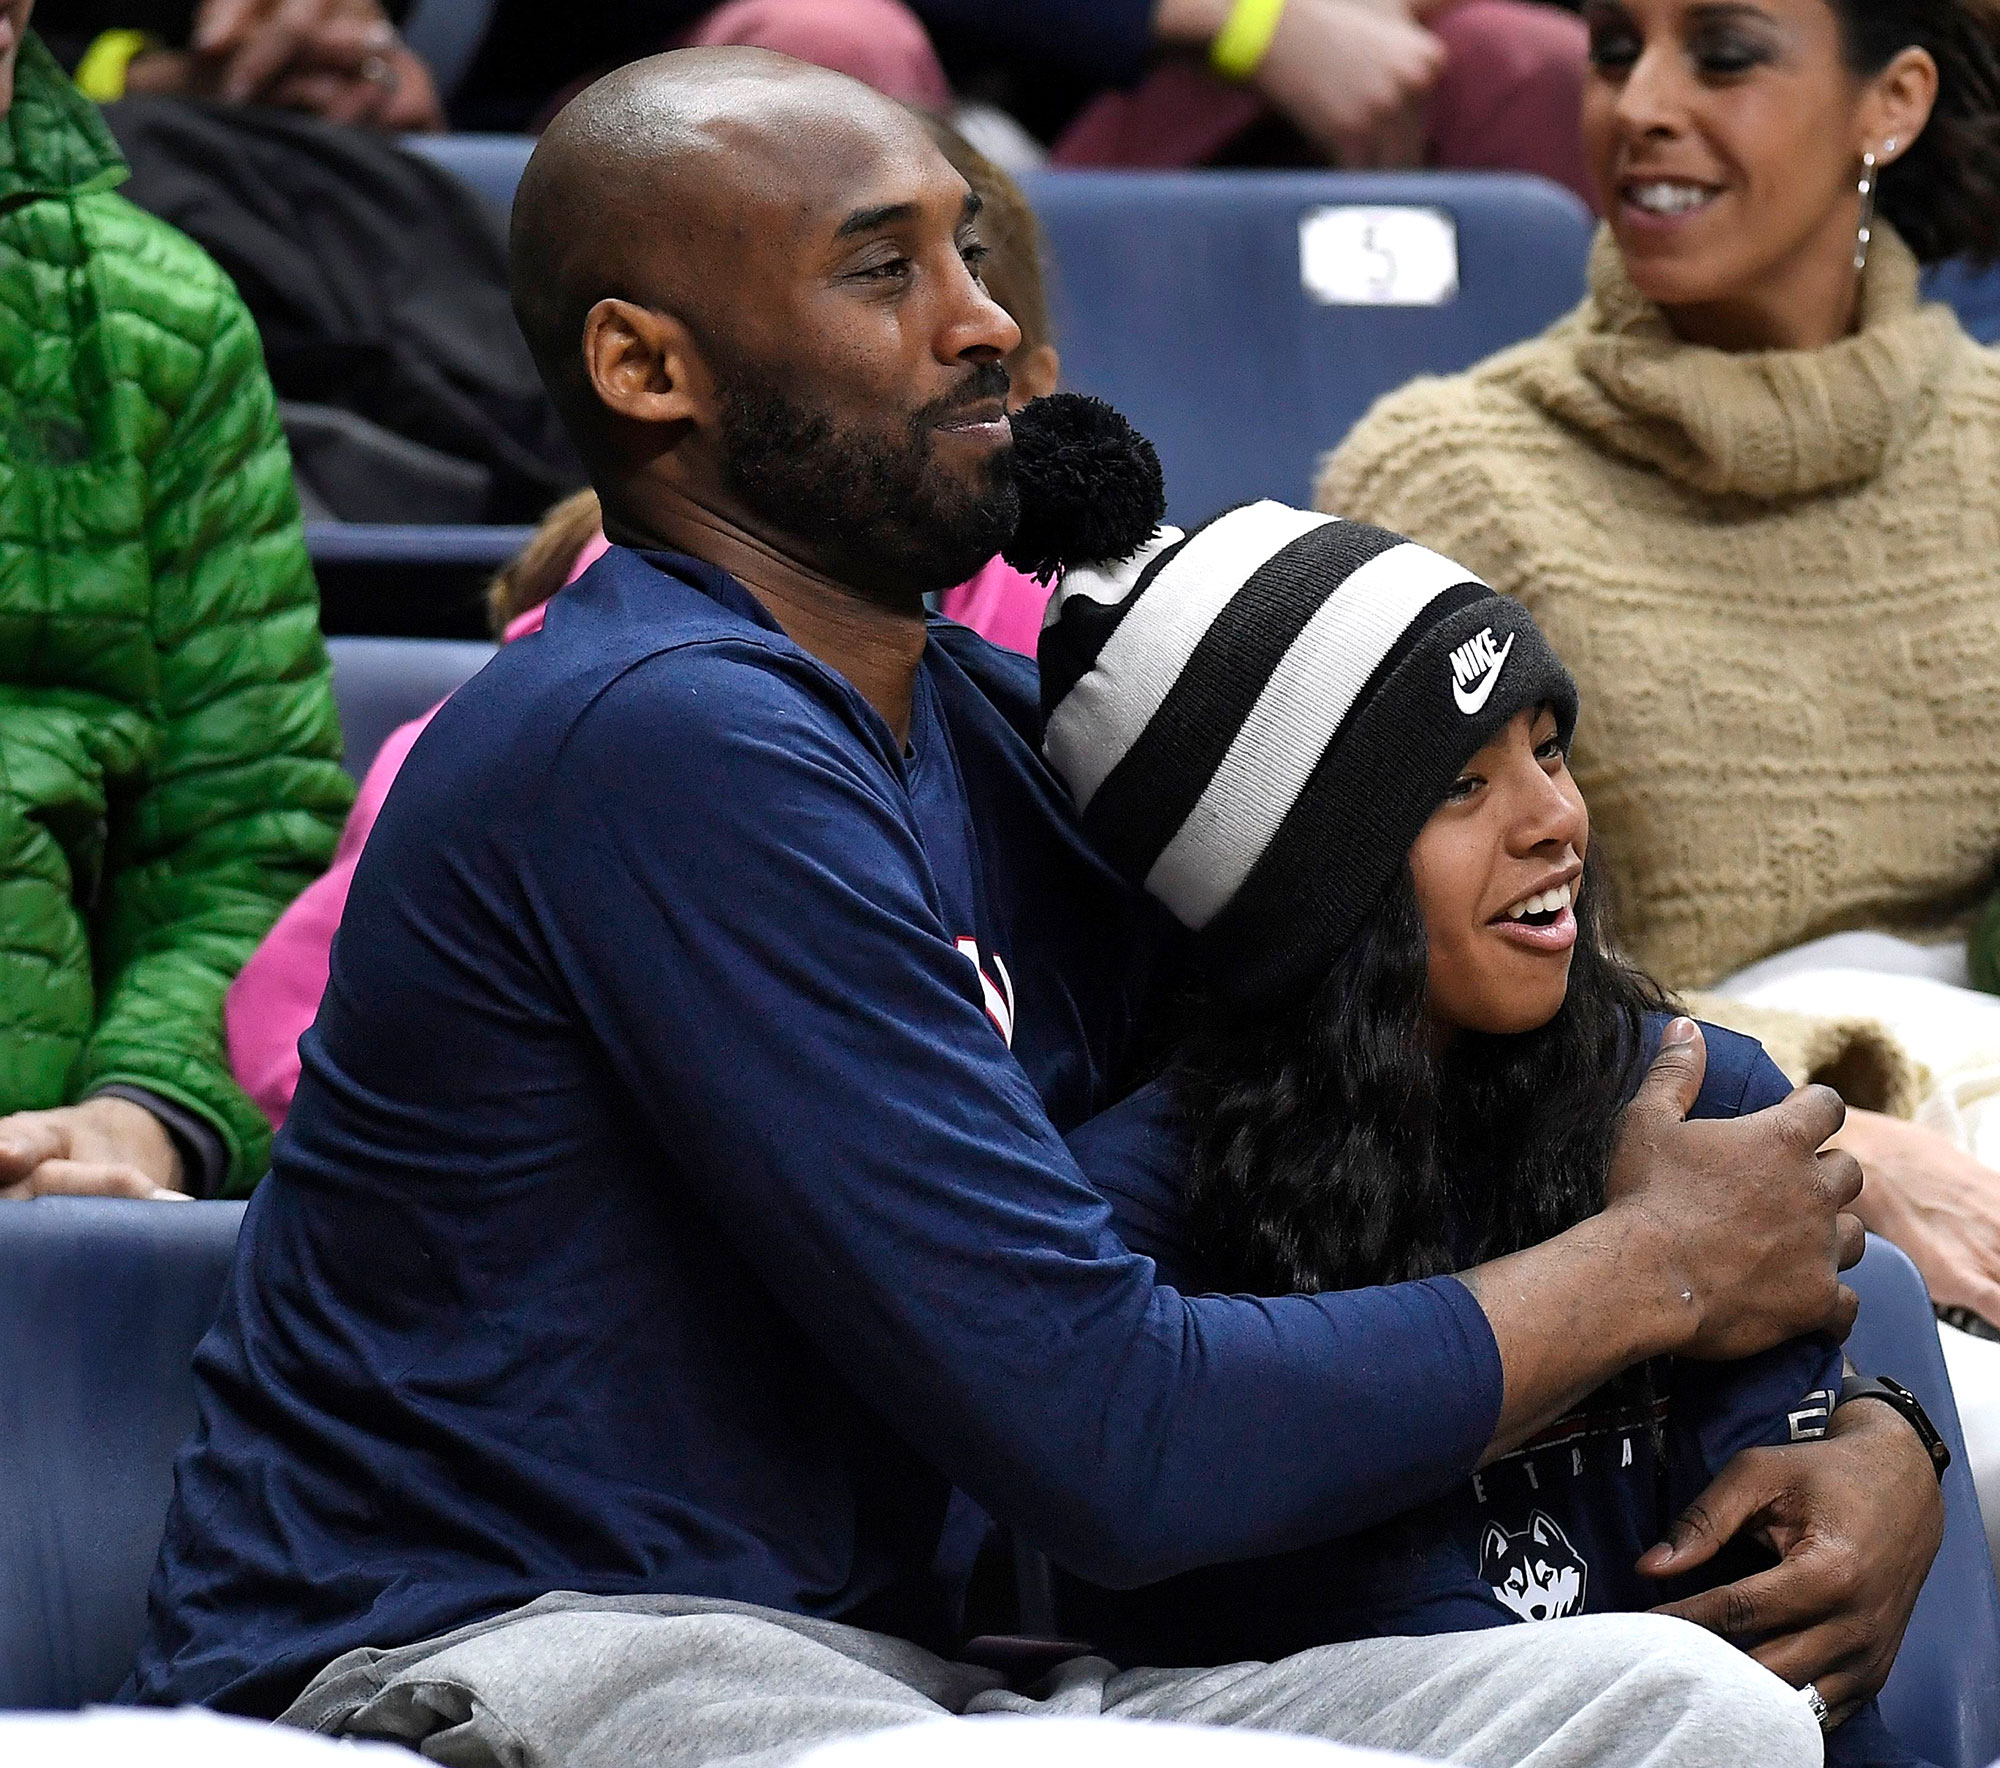 LeBron James puts on a show as Kobe Bryant sits courtside